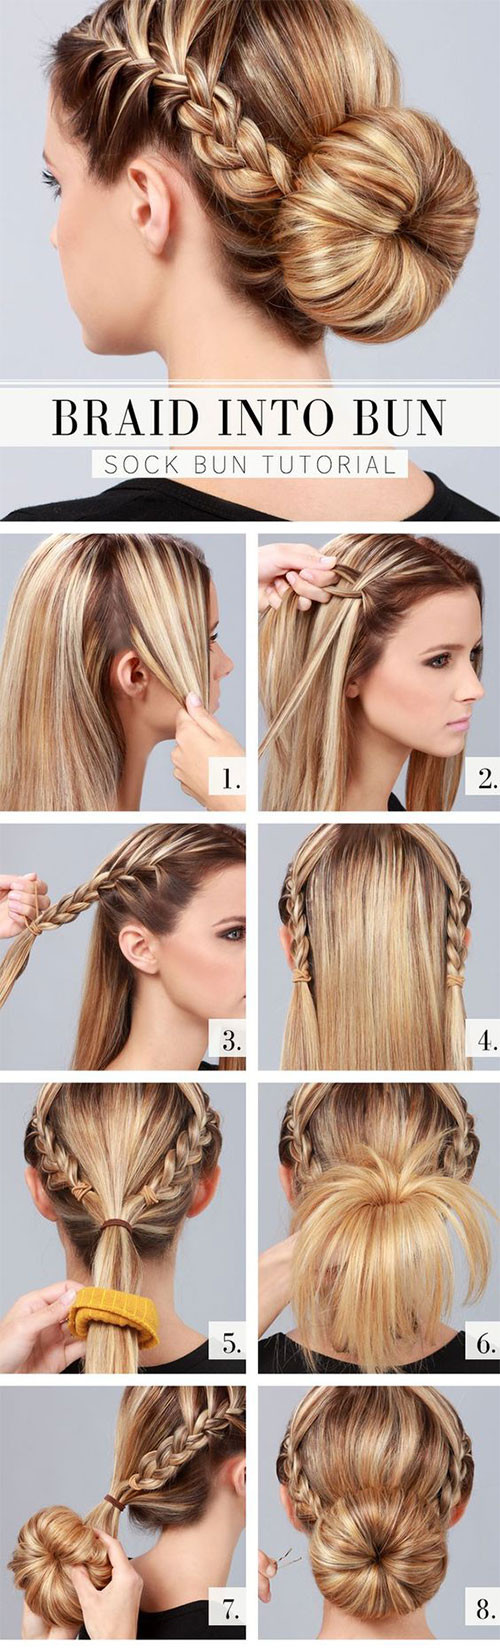 Cute And Easy Step By Step Hairstyles
 12 Easy Step By Step Summer Hairstyle Tutorials For